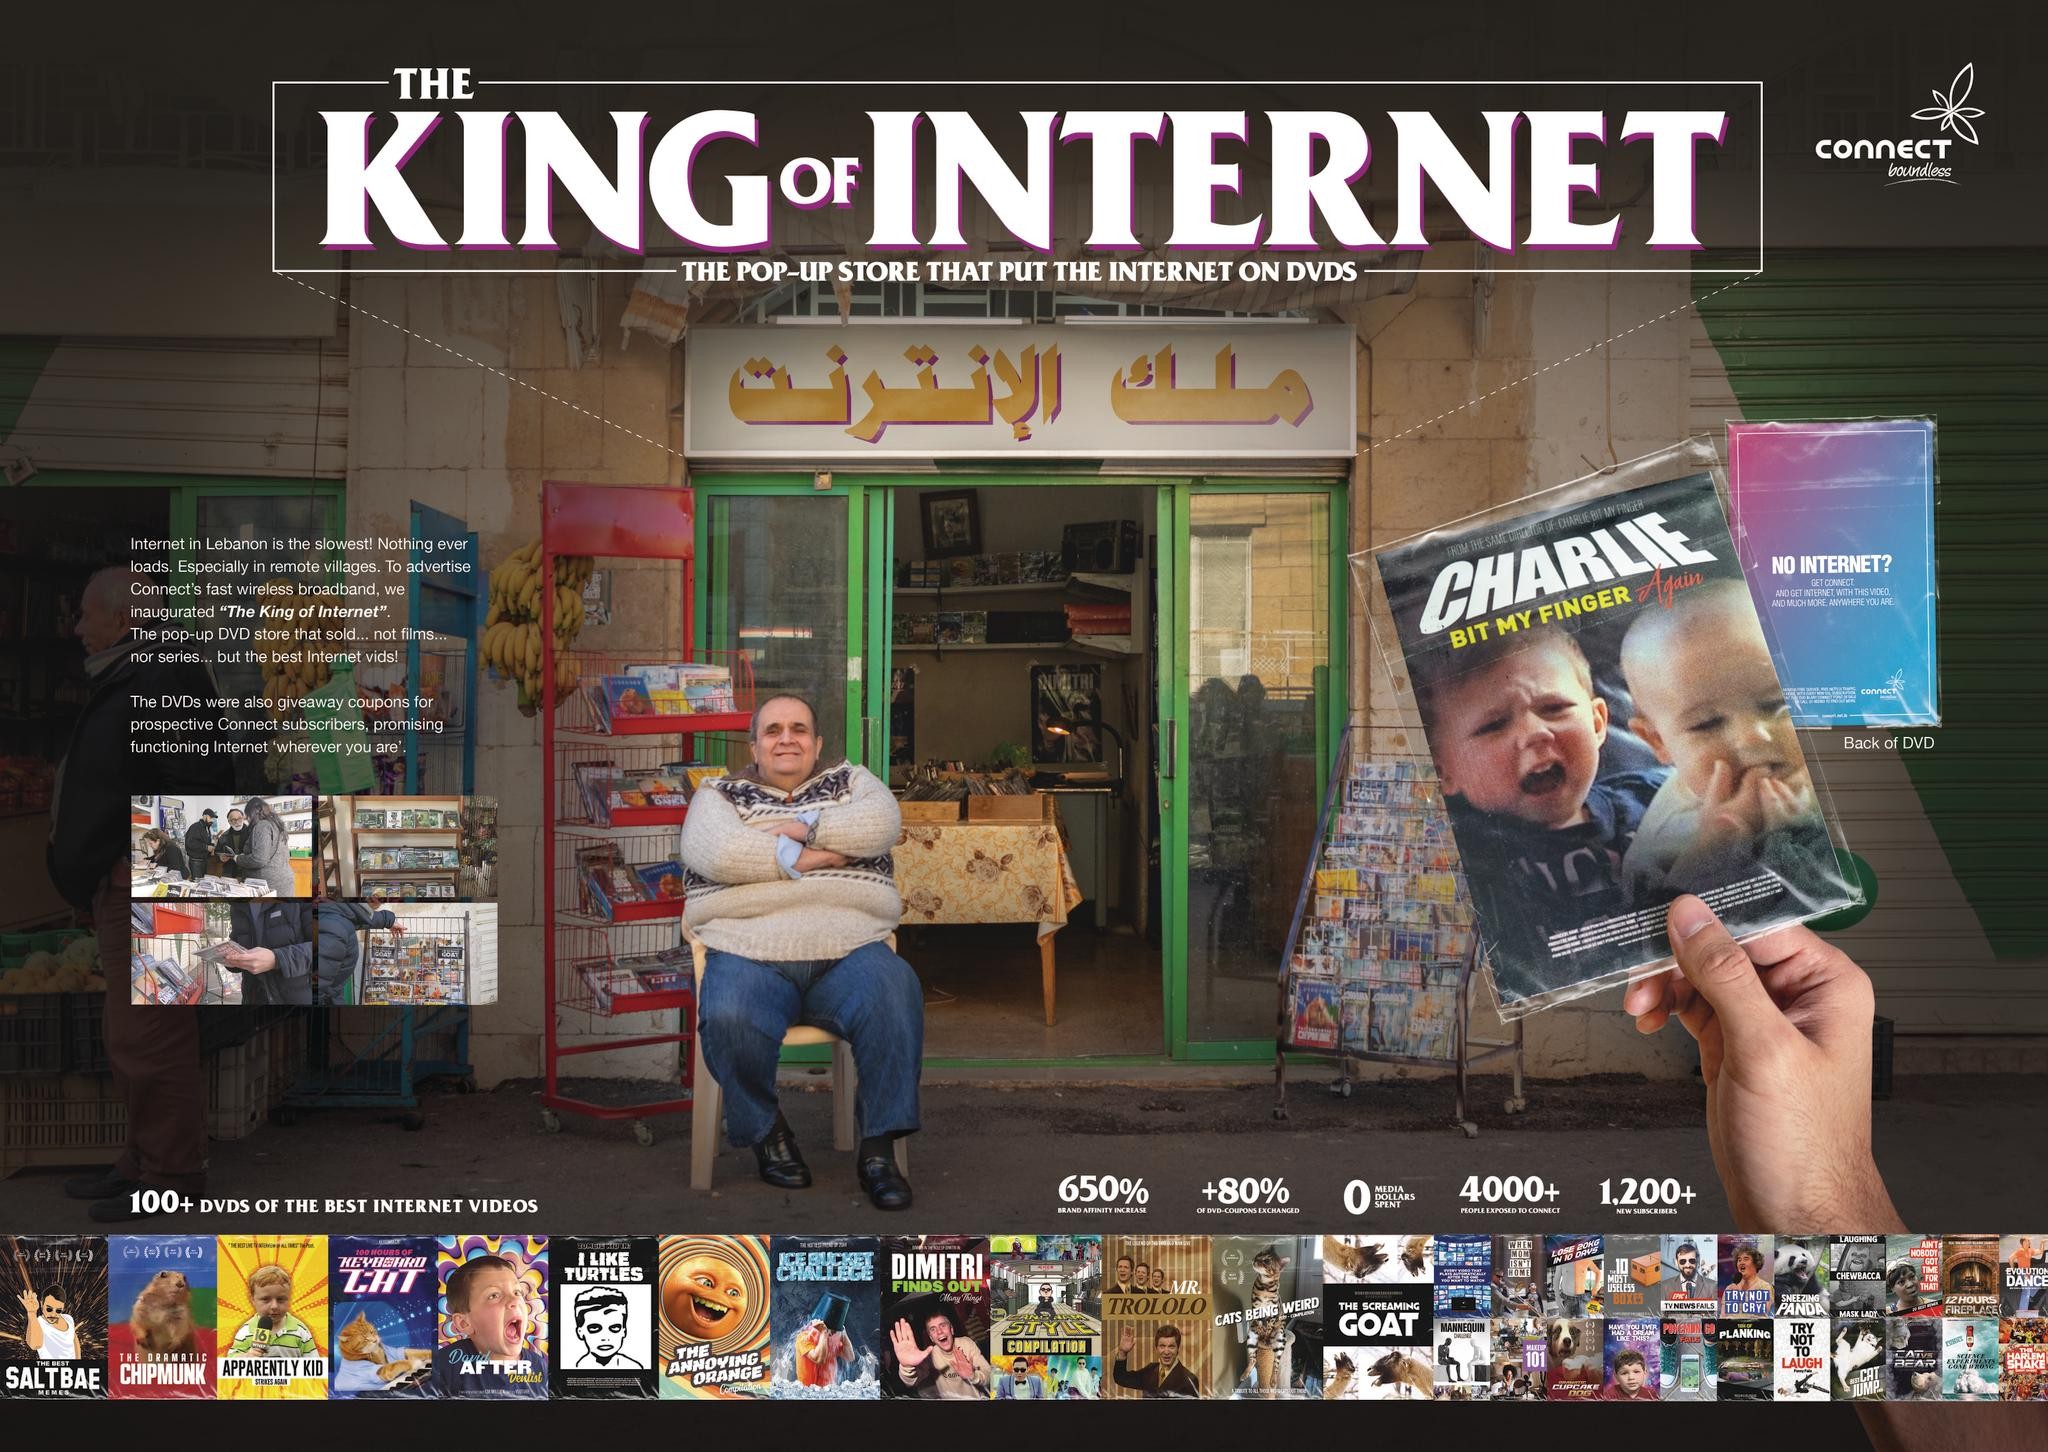 The King of Internet